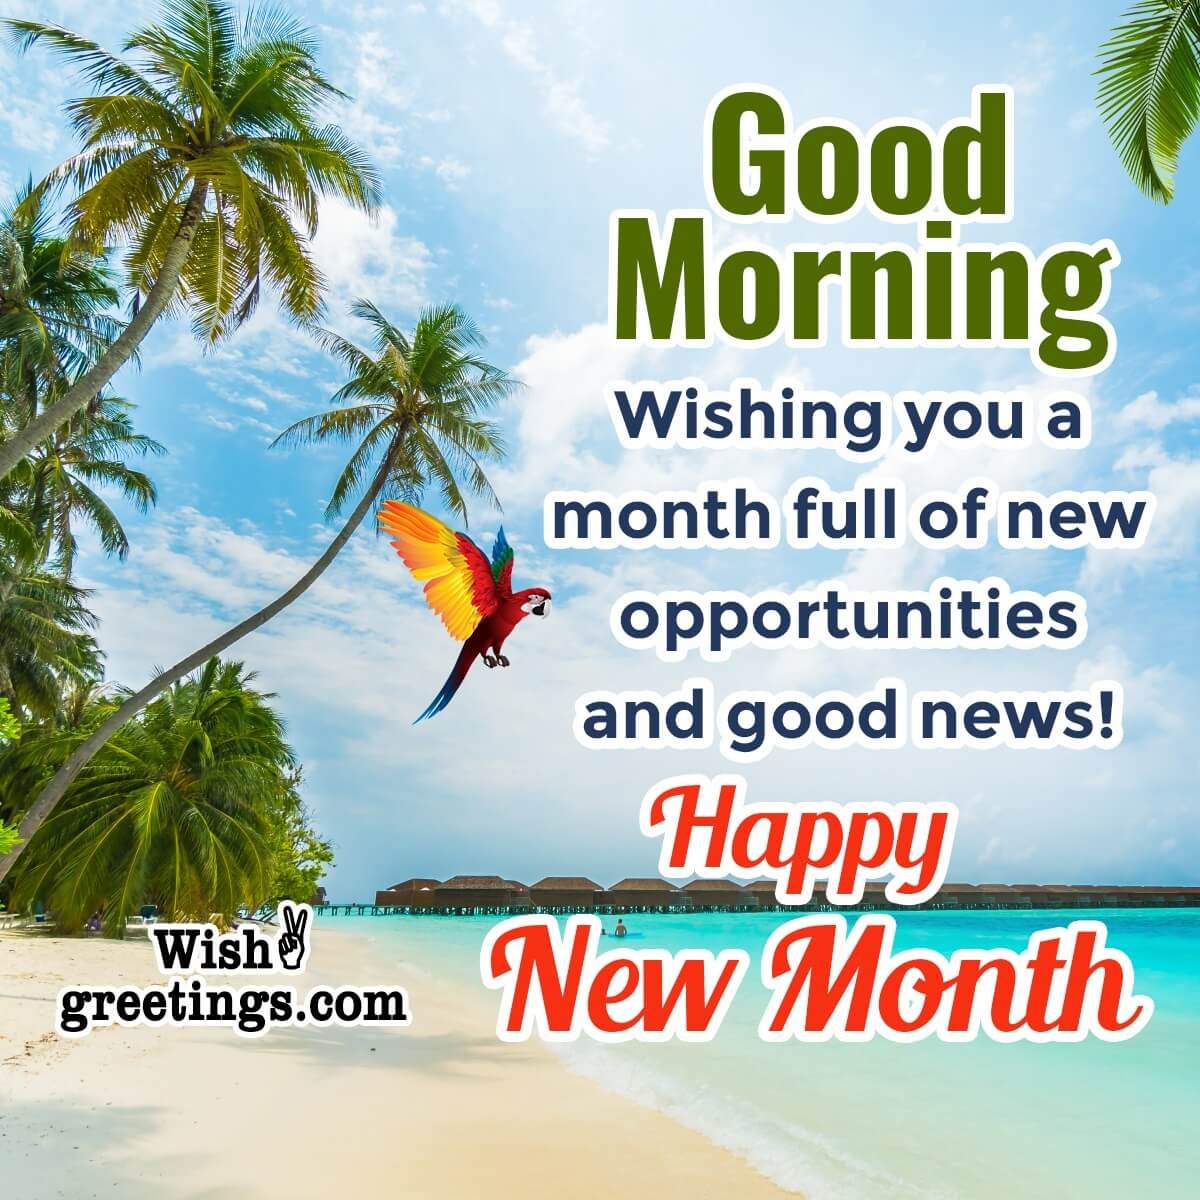 Good Morning Happy New Month Wishes